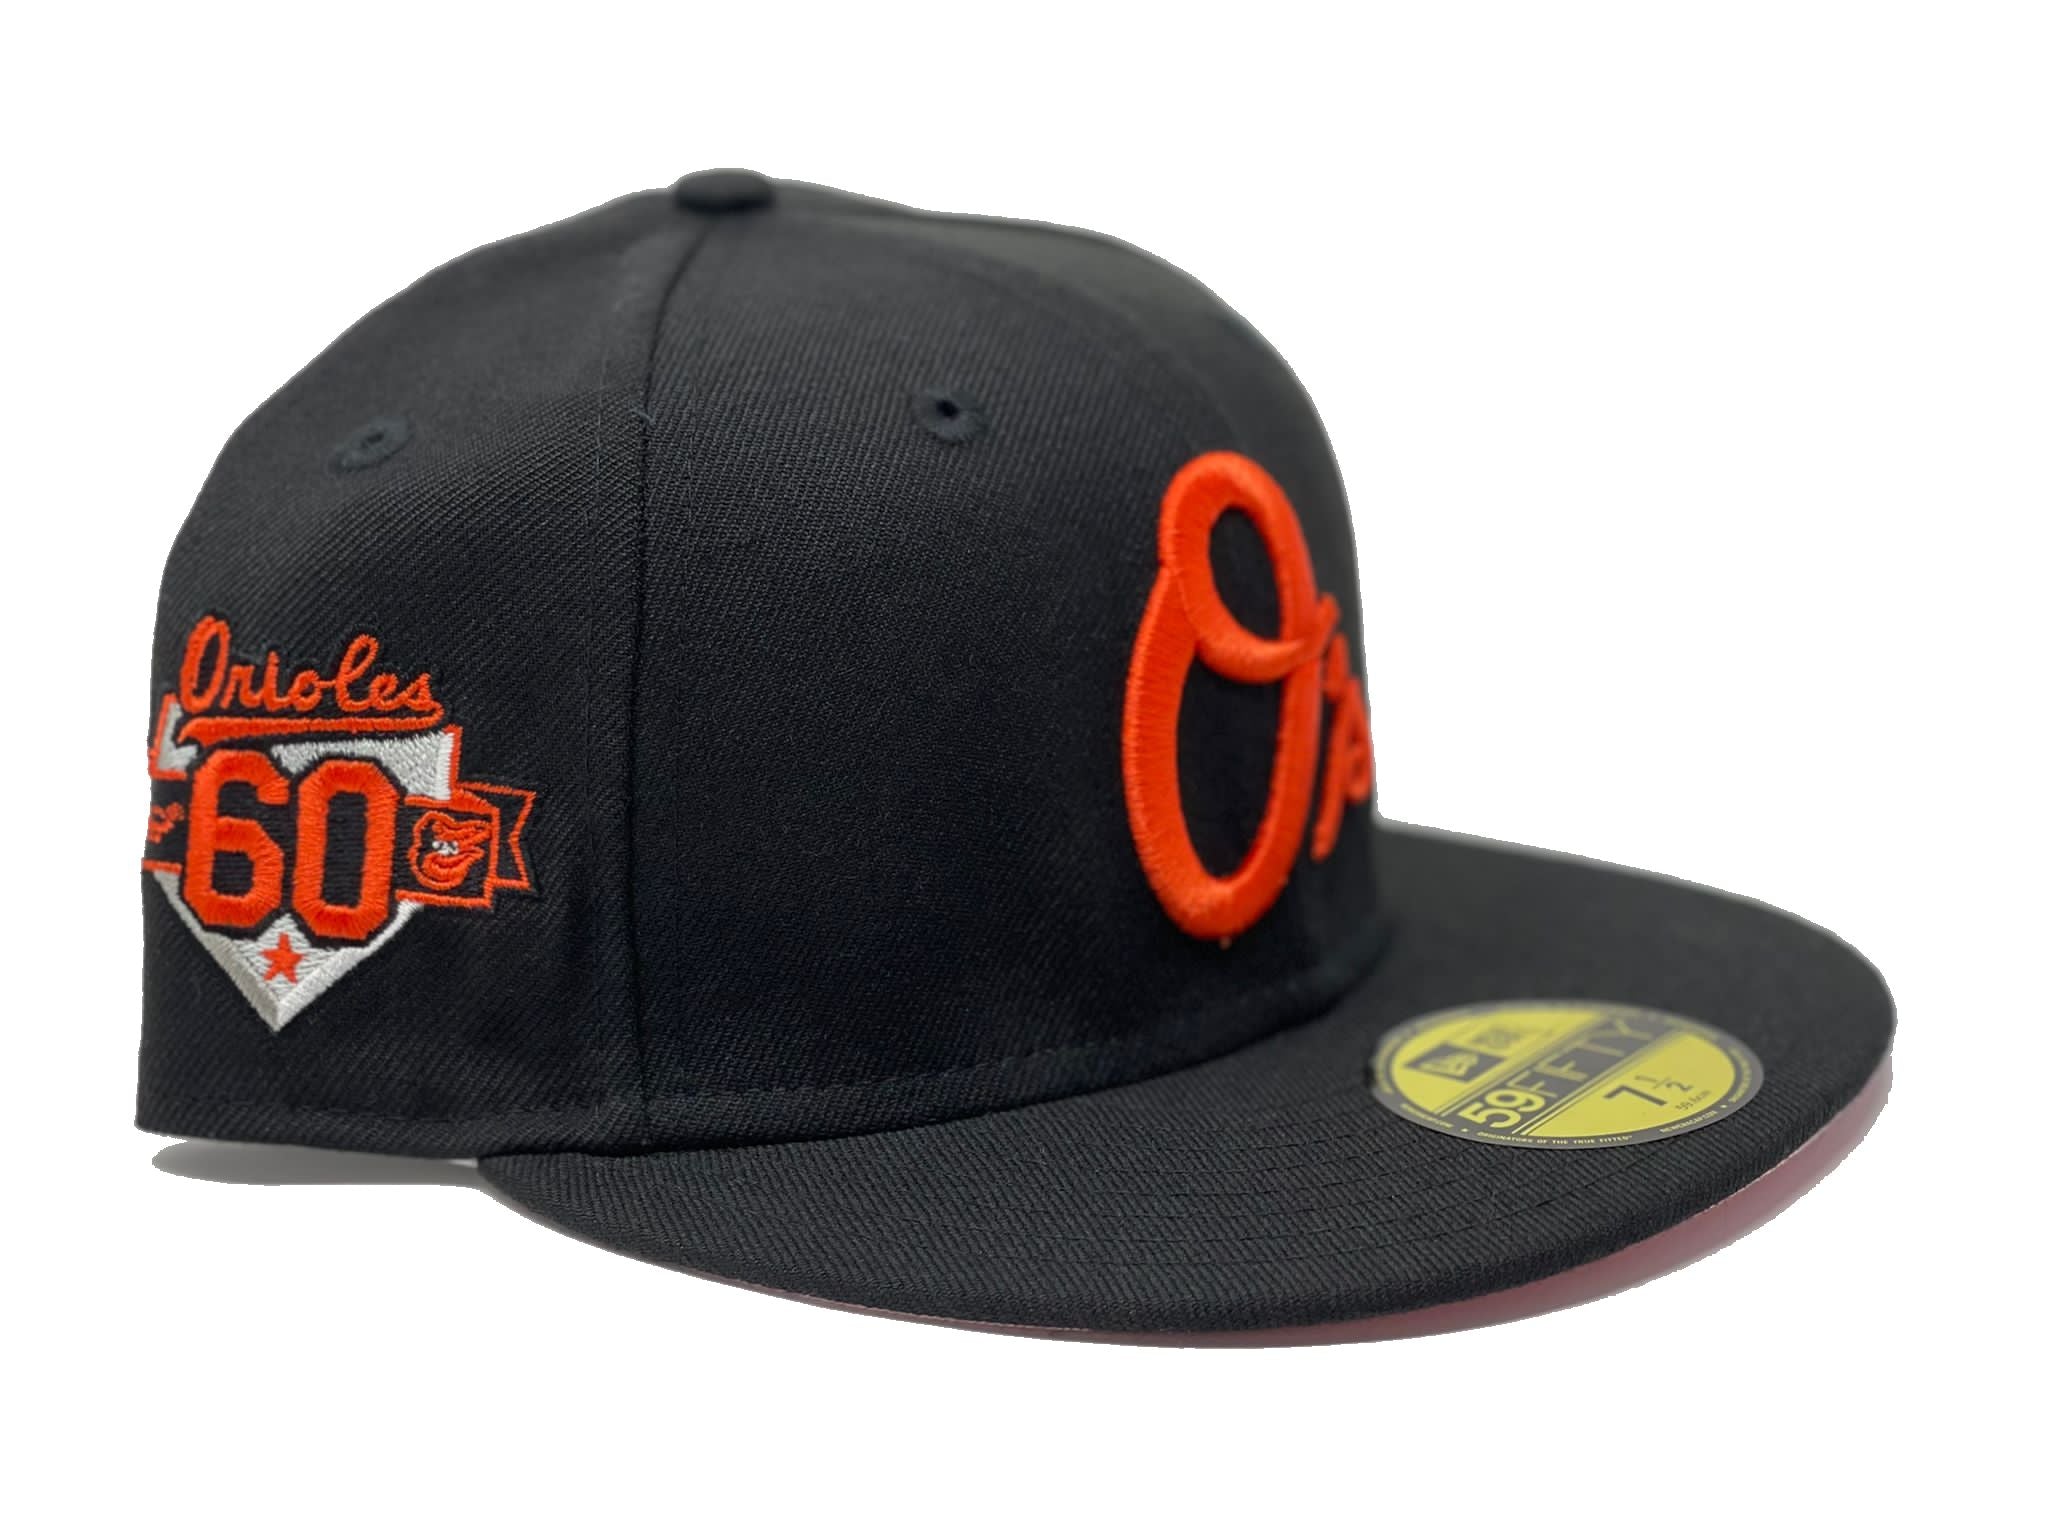 Baltimore Orioles to Wear 60th Anniversary Patch in 2014 – SportsLogos.Net  News